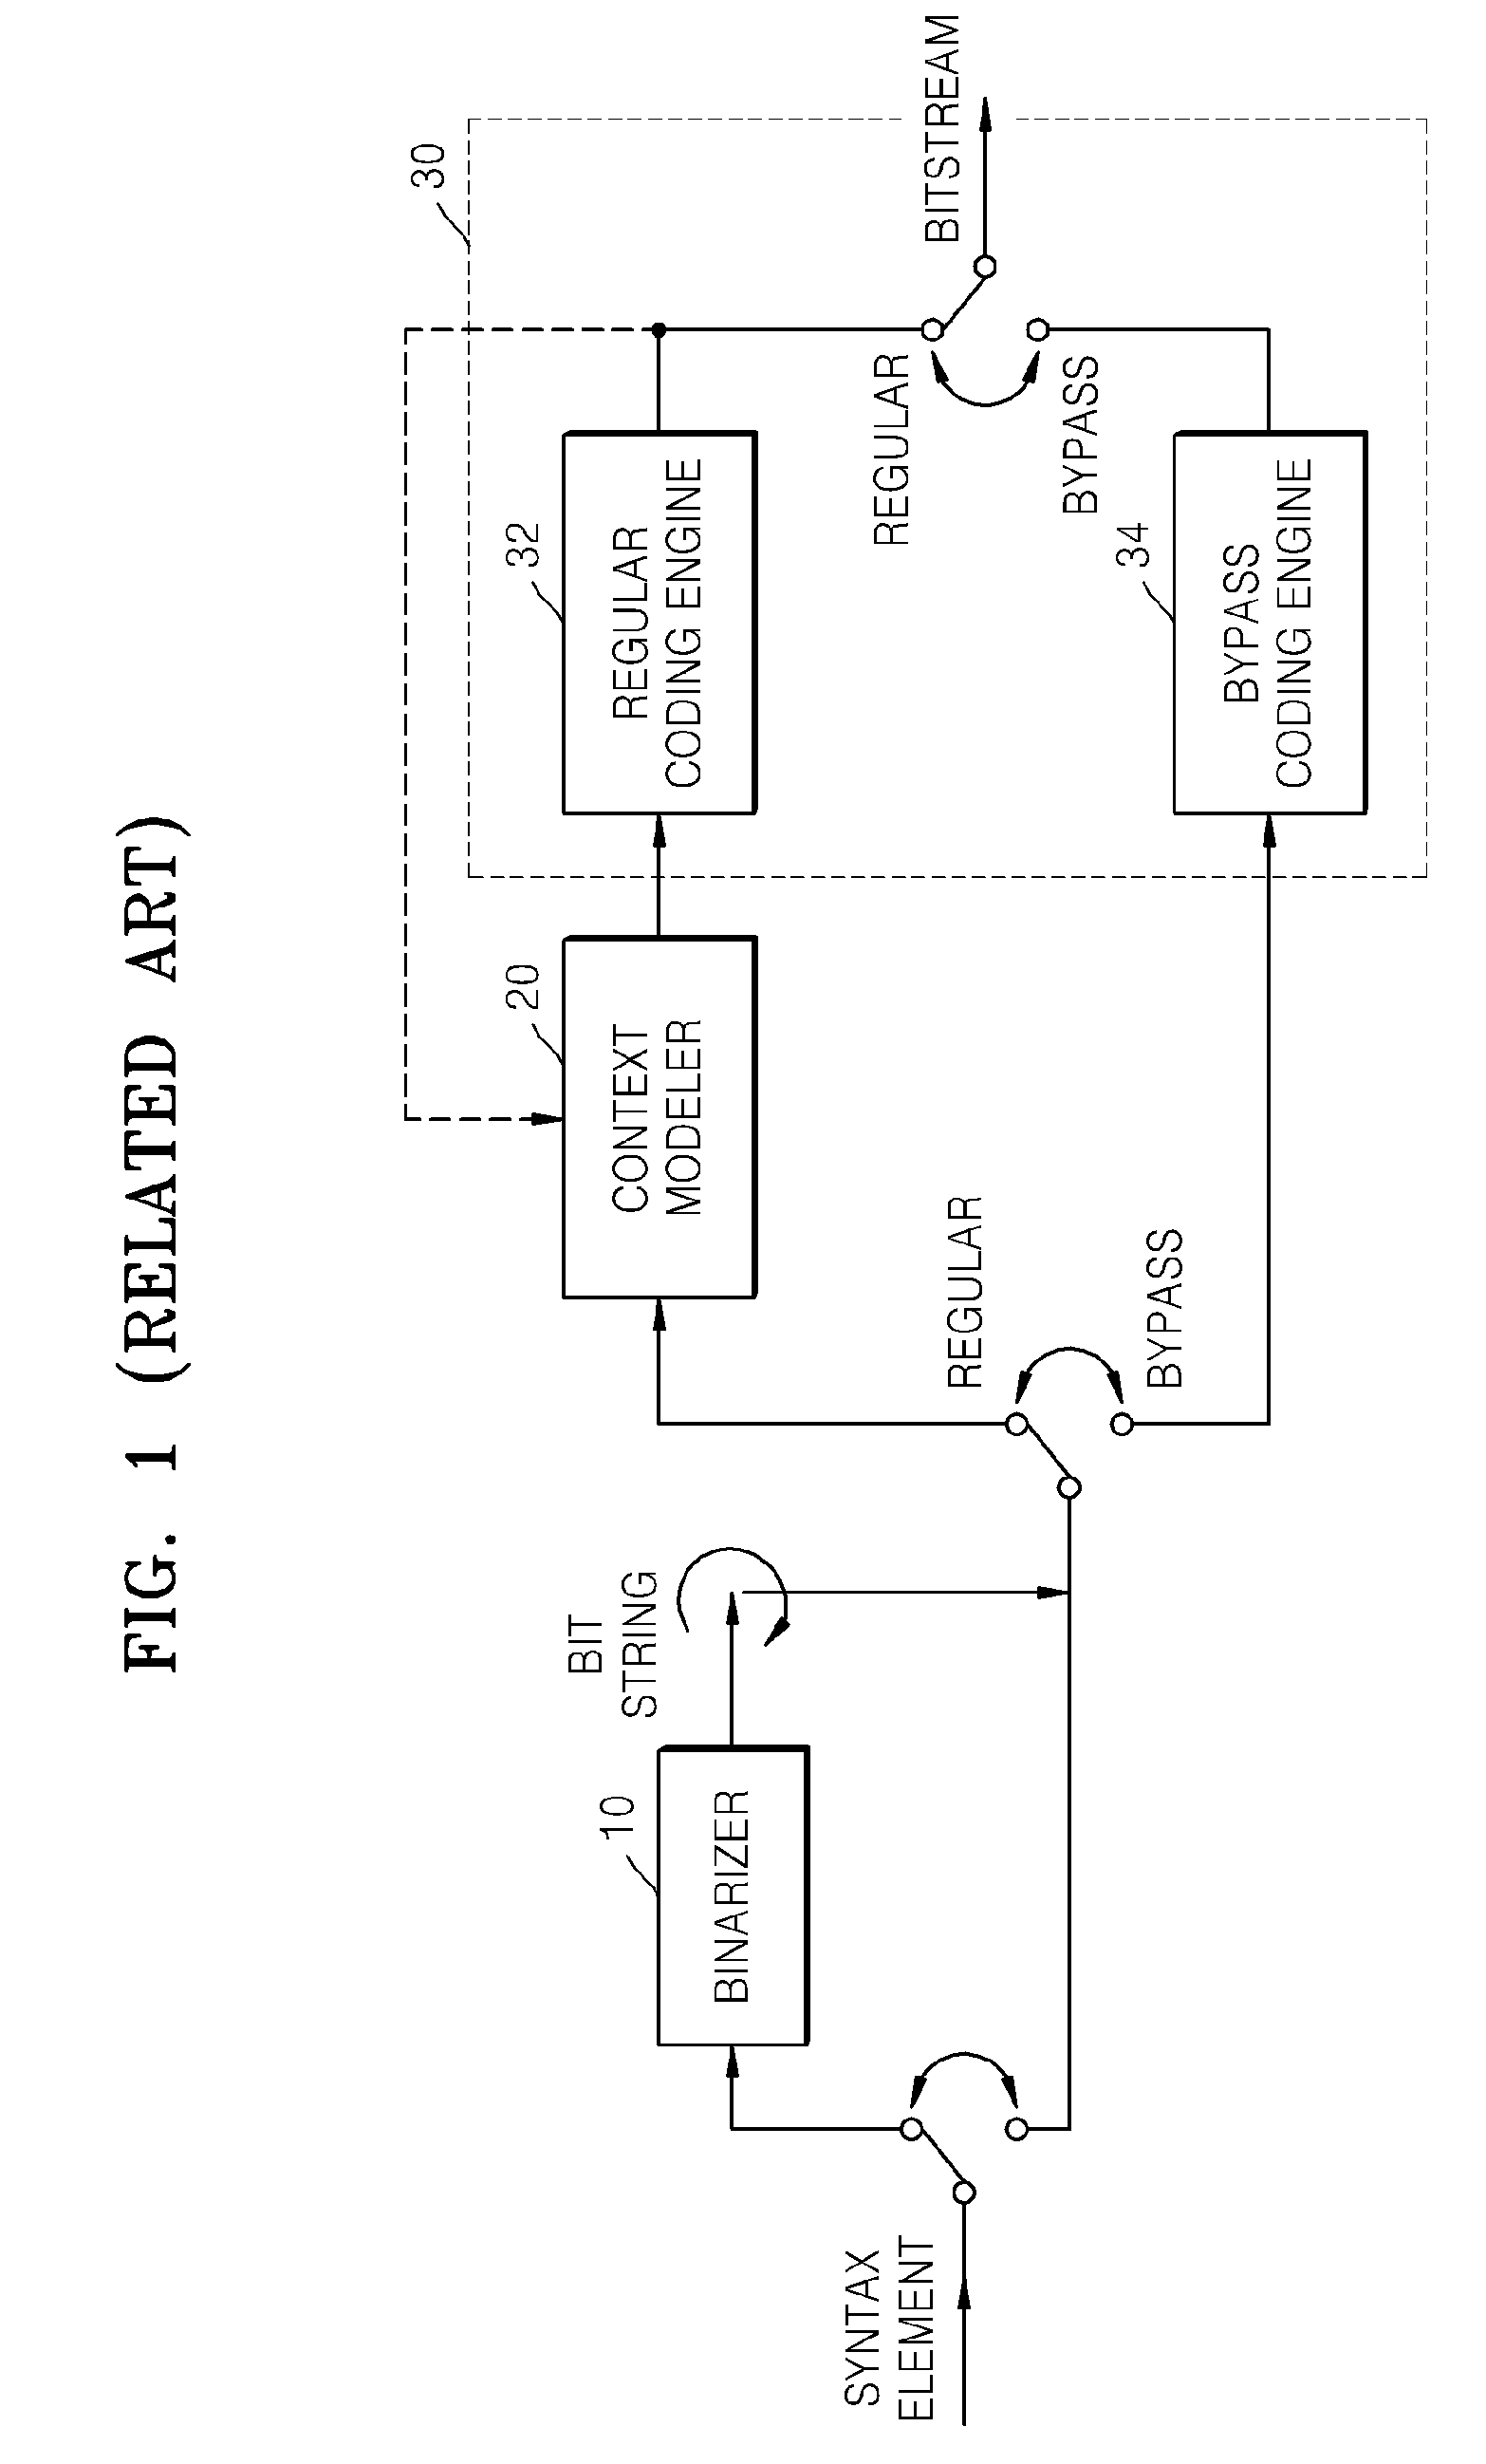 Method and apparatus for context adaptive binary arithmetic coding and decoding